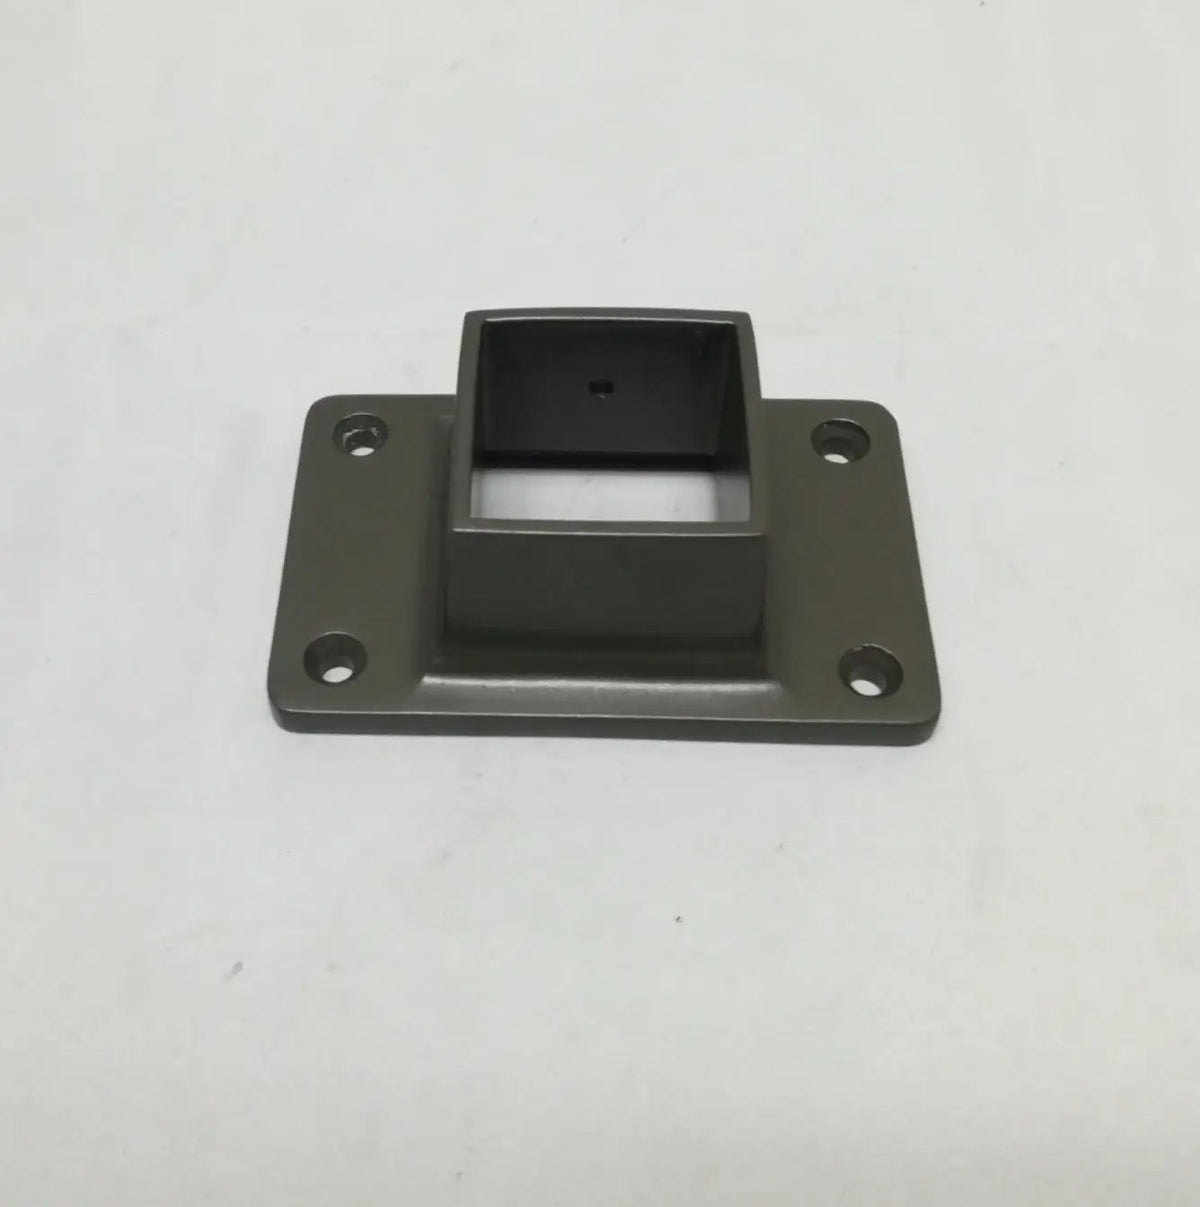 Narrow Flange For 1-1/2" Square Tubing - Trade Diversified